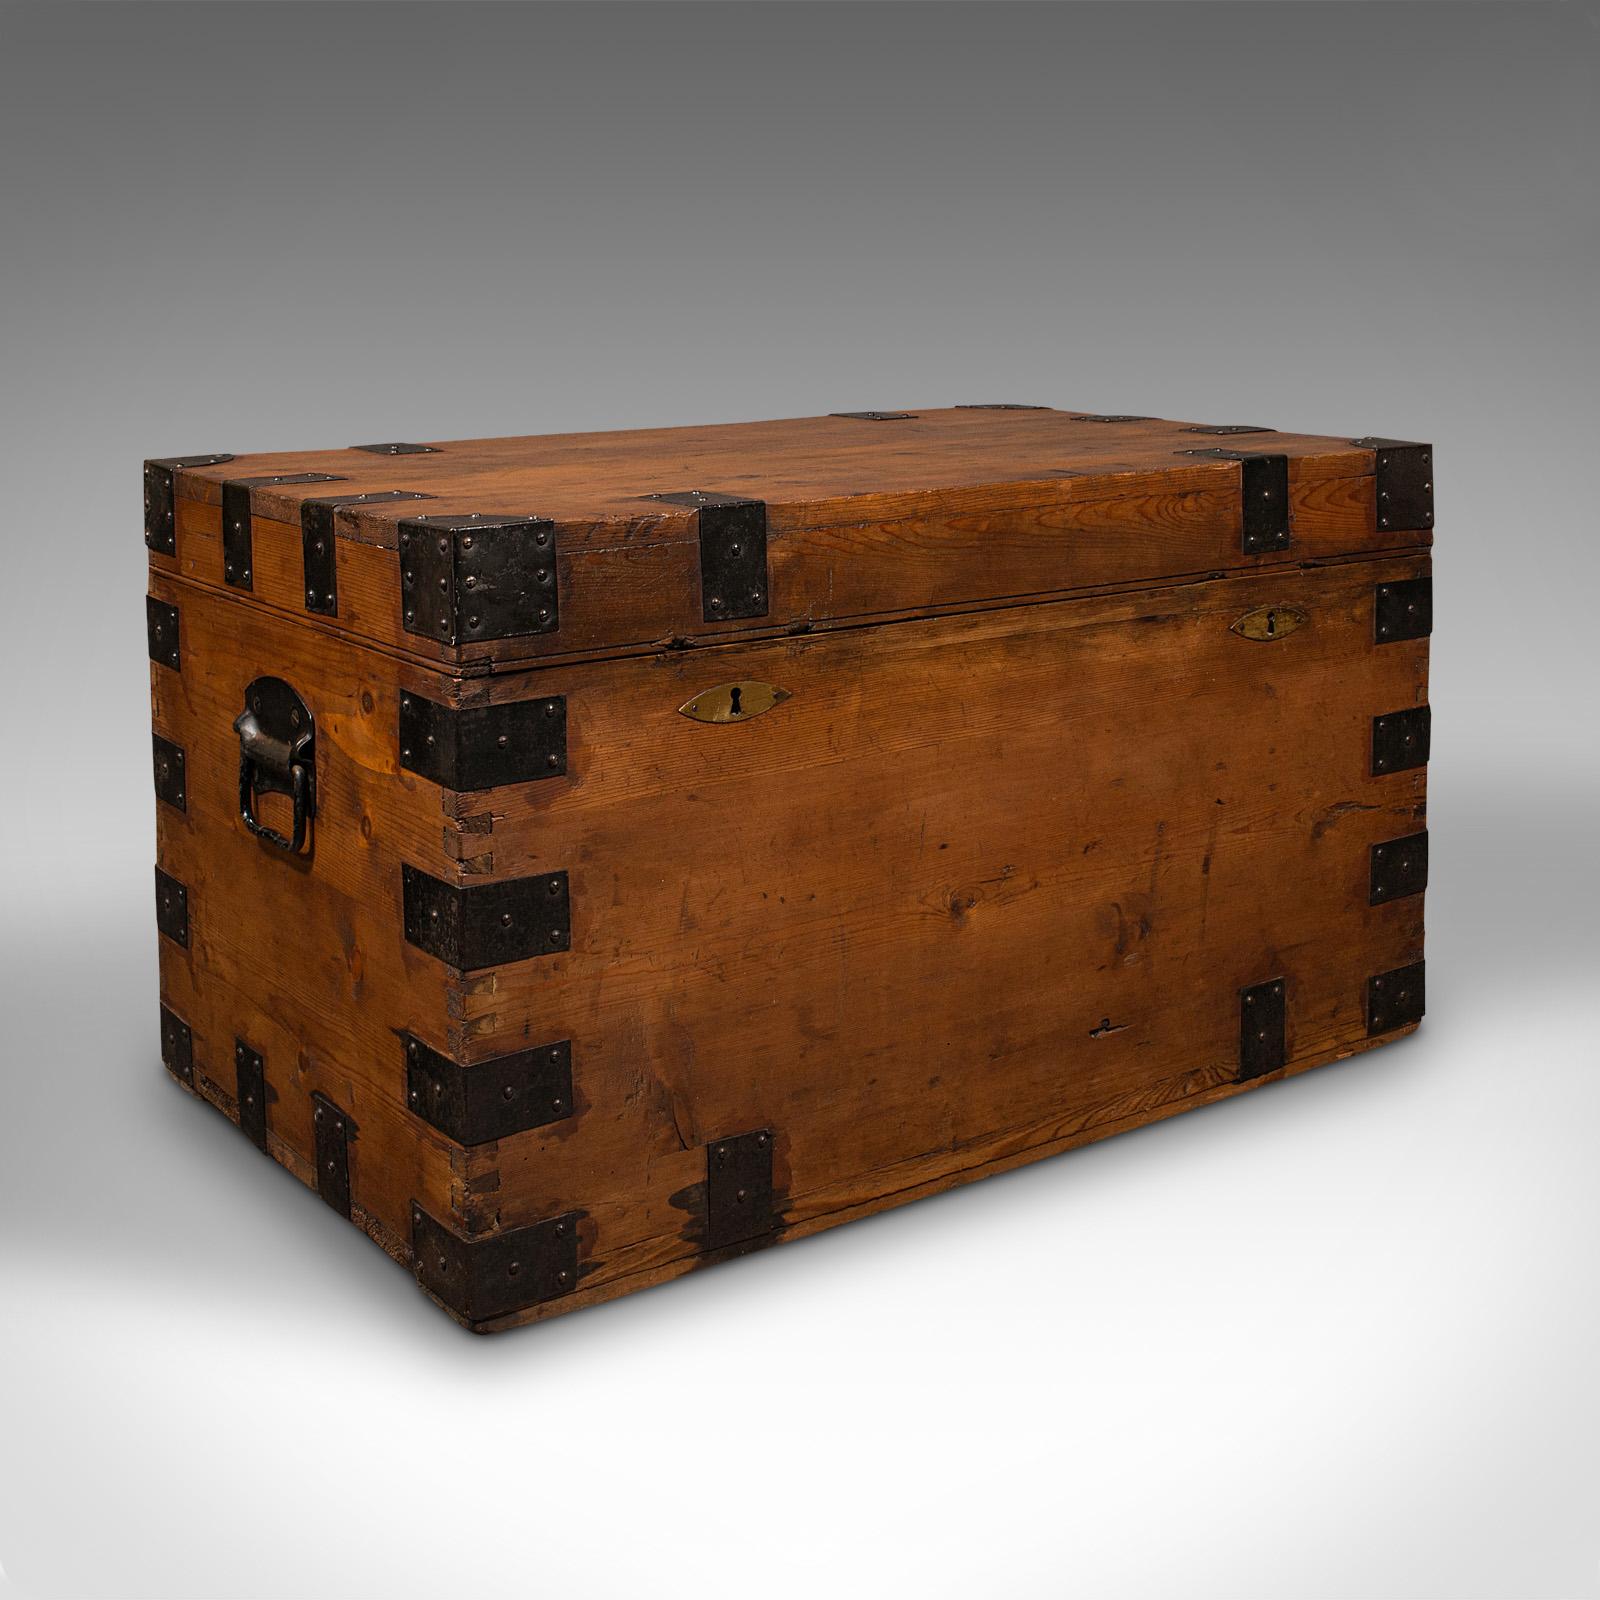 This is a substantial antique mercantile chest. An English, pine shipping trunk with tin lined interior, dating to the late Victorian period, circa 1880.

Bound and braced, with an attractive Victorian appeal
Displays a desirable aged patina and